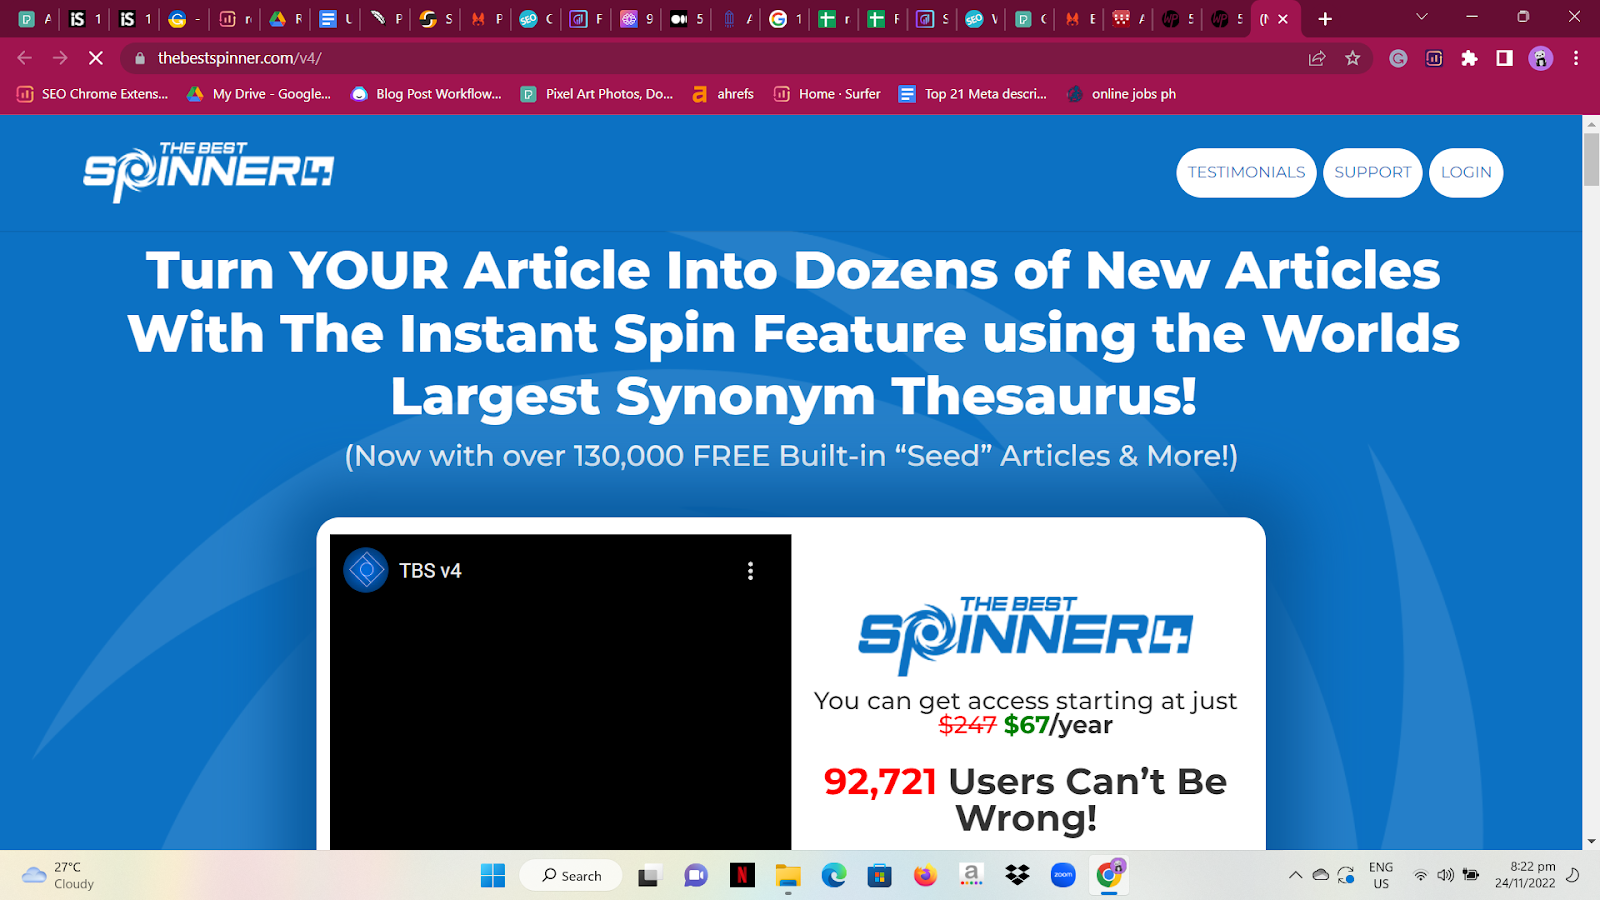 The Best Spinner 4. The Best Spinner is another effective and well-liked sentence rewording tool. It quickly rewrites entire phrases or paragraphs by swapping out the words for synonyms.